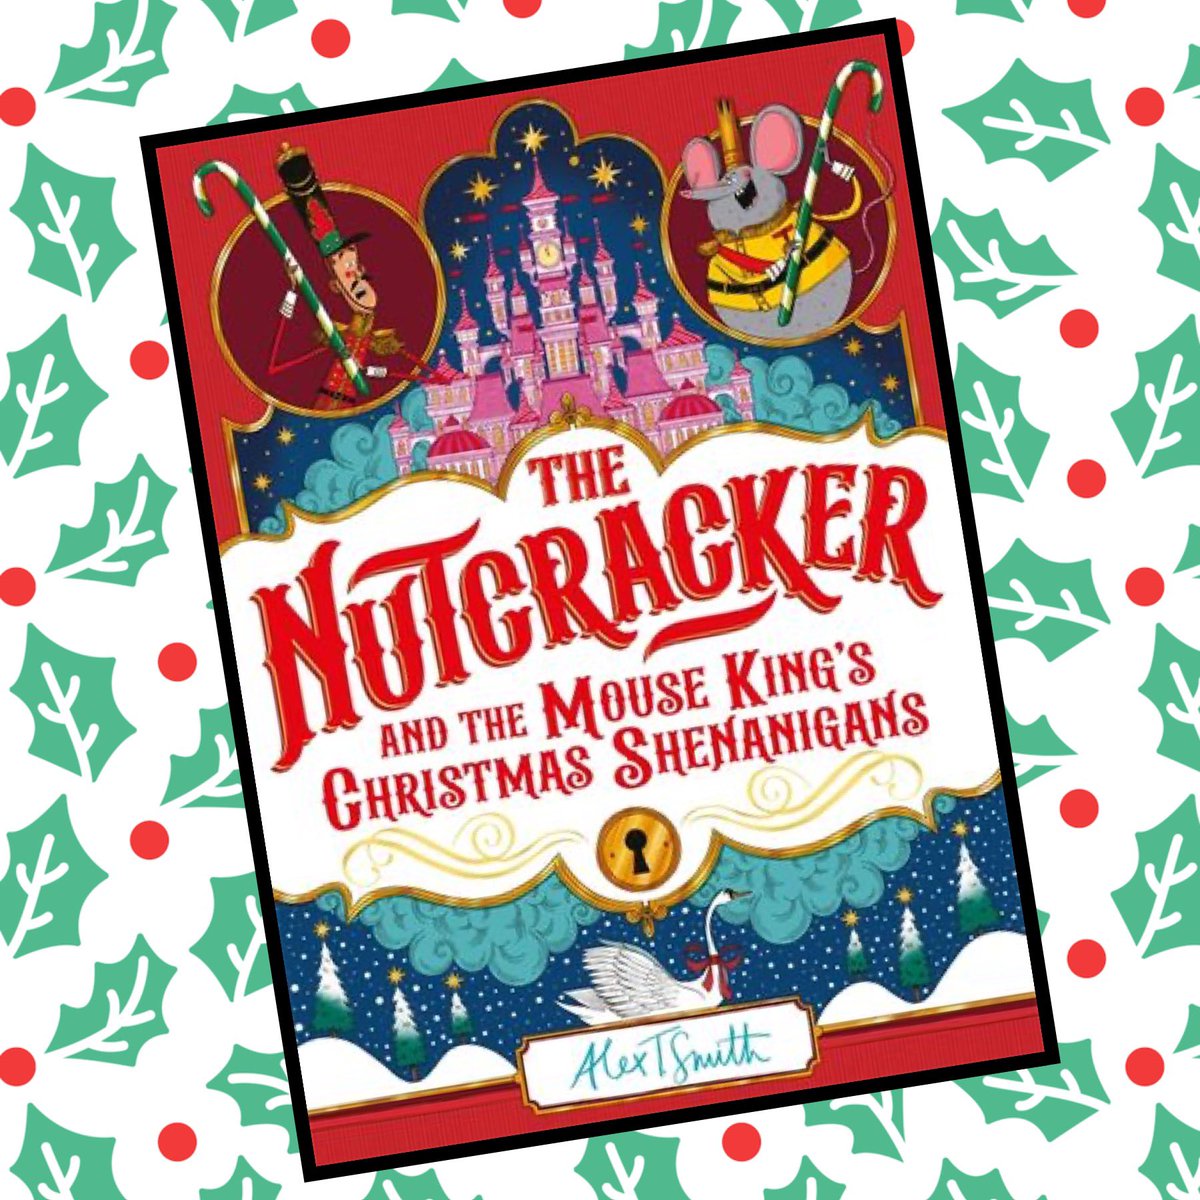 #BookAdvent23 Day 1 It has to be this beauty from @Alex_T_Smith. If you aren’t already acquainted with Alex’s wonderful Christmas countdowns, now’s a great time to start! #TheNutcracker